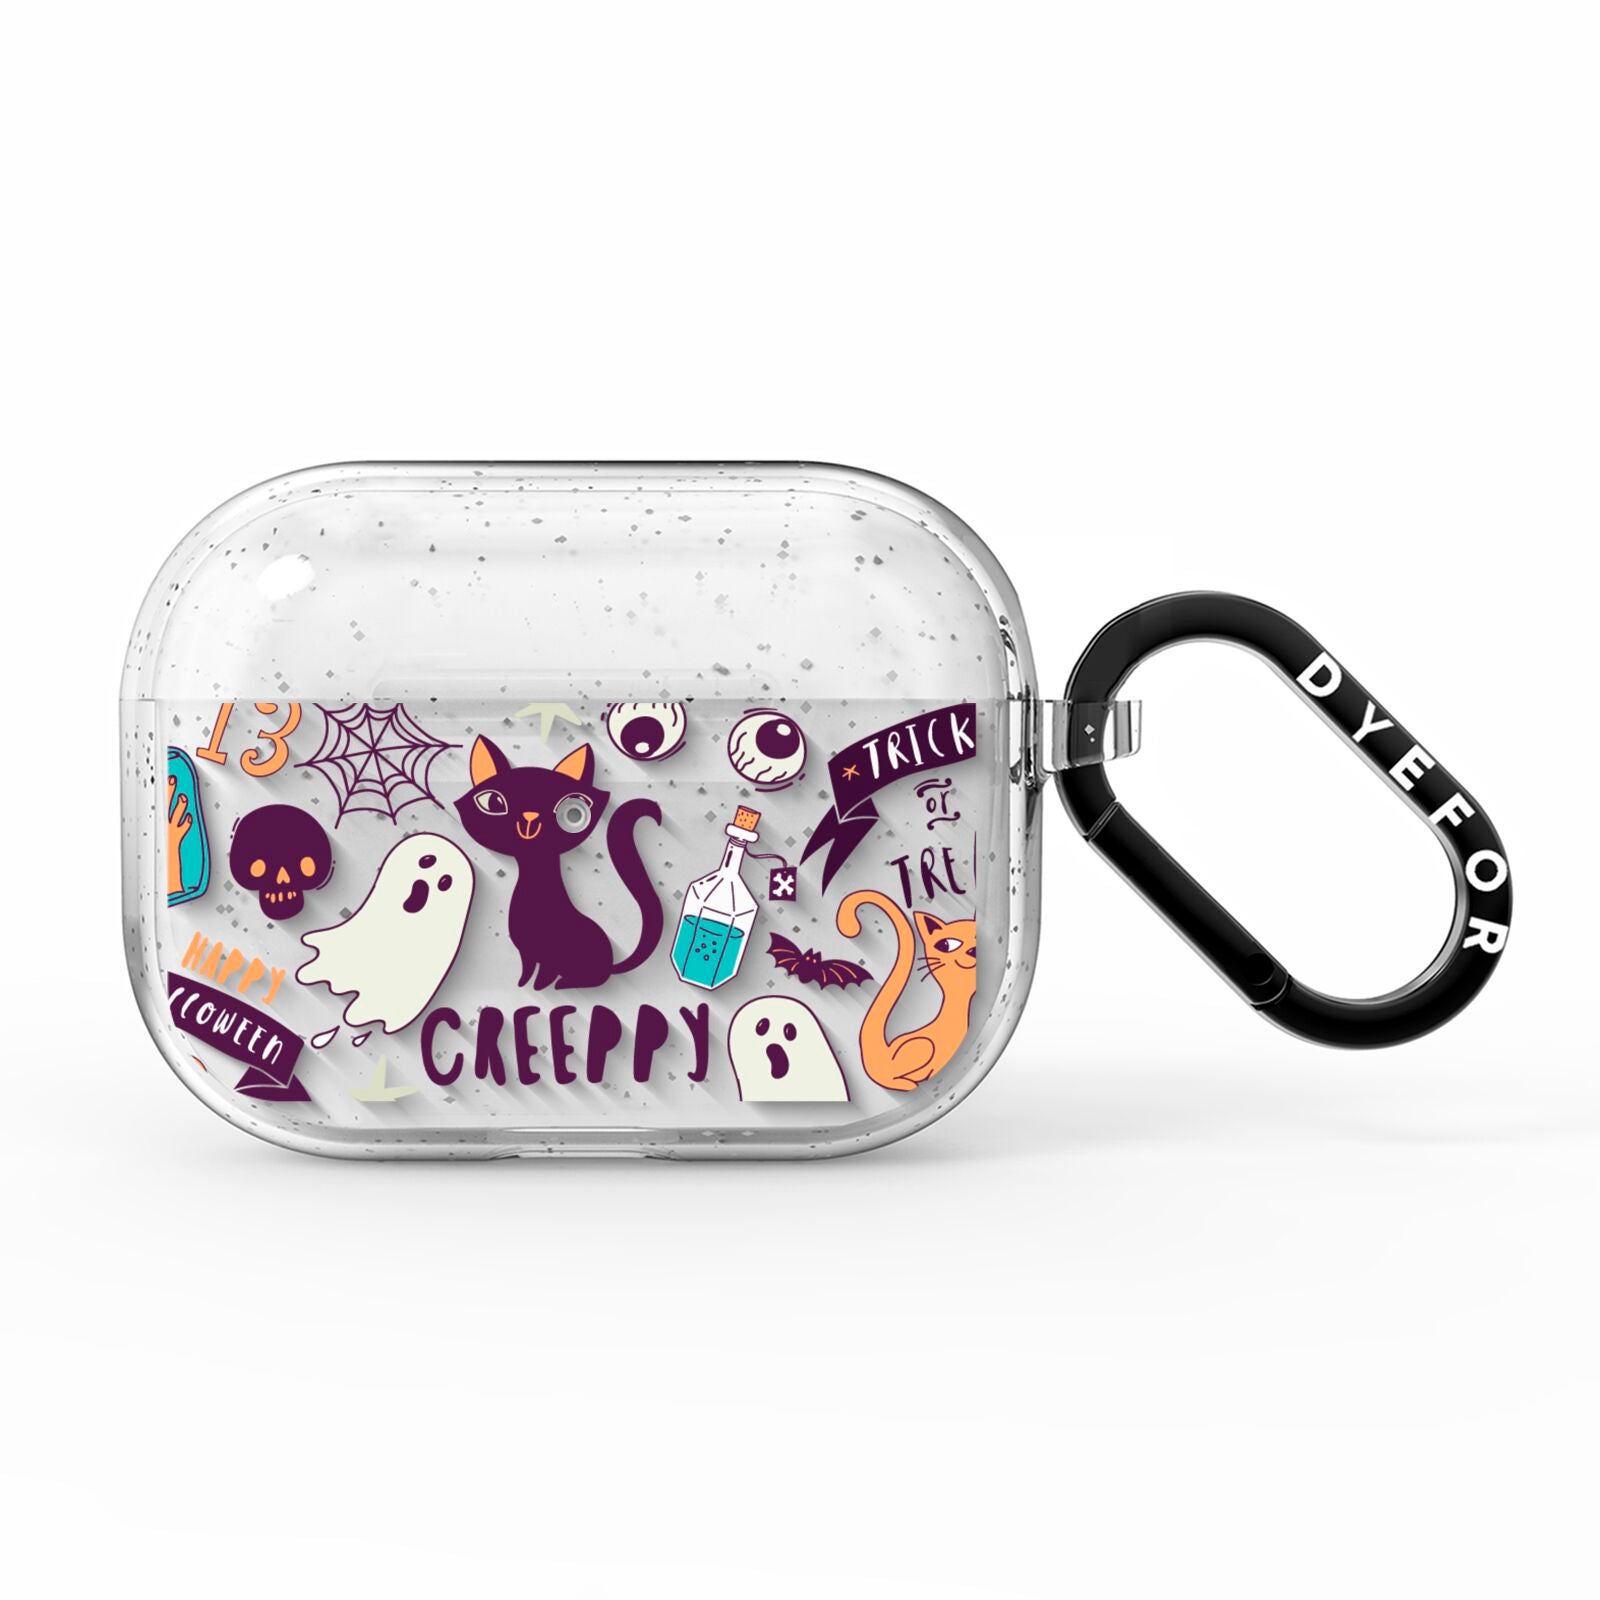 Wacky Purple and Orange Halloween Images AirPods Pro Glitter Case